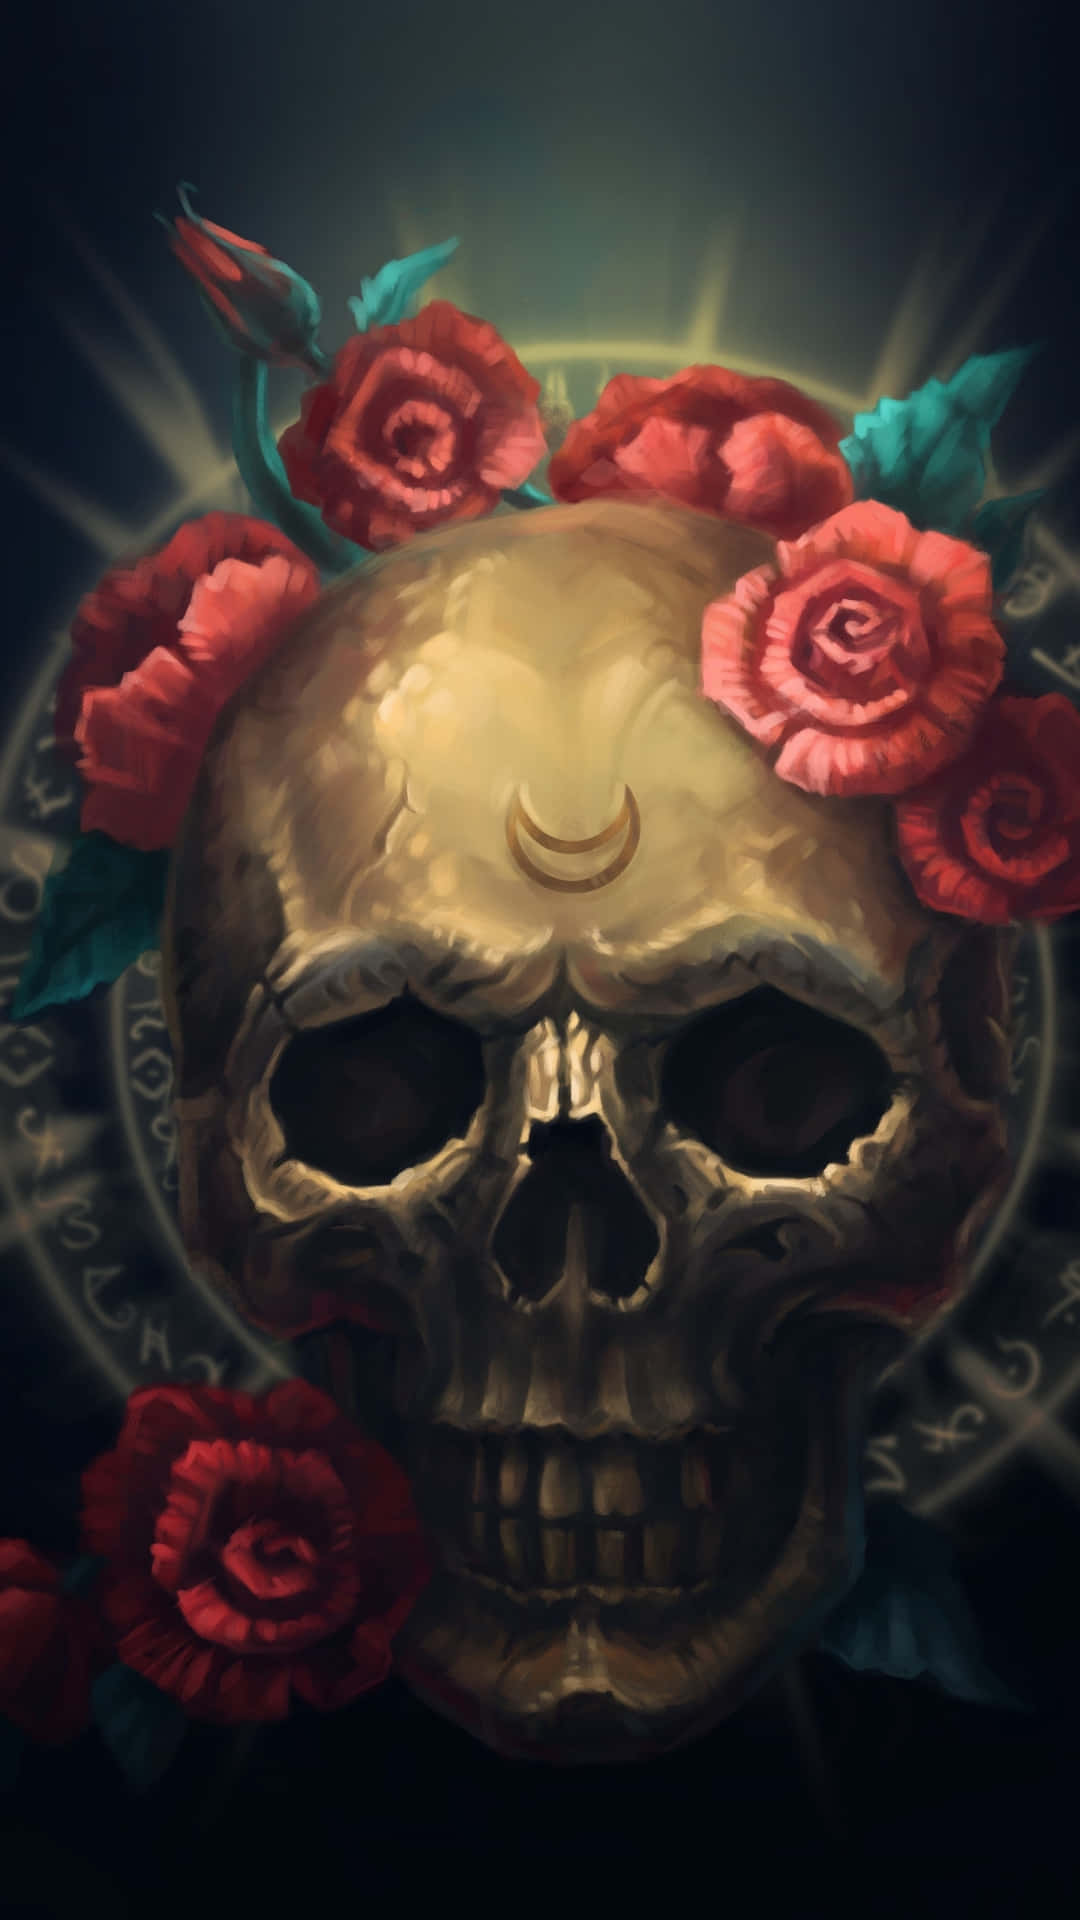 "Explore the wonders of the universe with the Galaxy Skull" Wallpaper